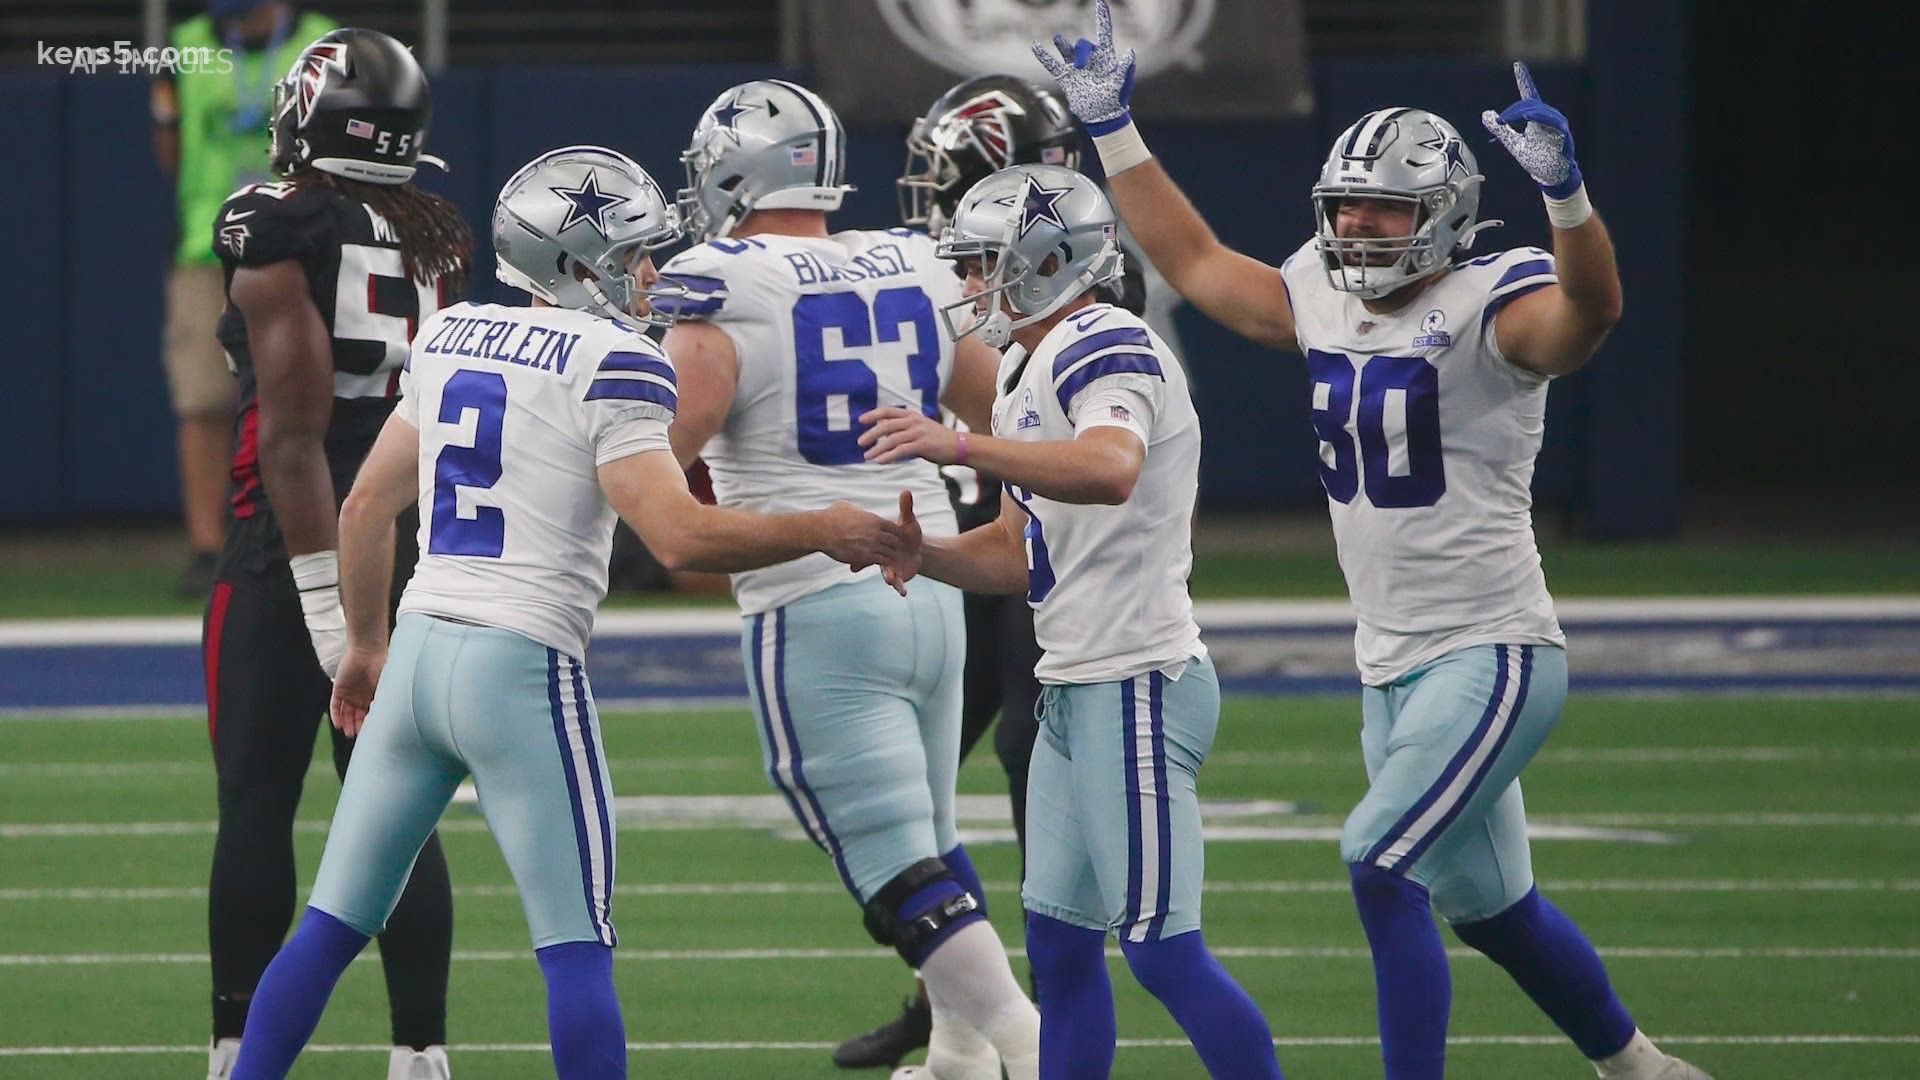 Dallas struggled early, but thanks to strong play from Dak Prescott, a wonky onside kick and a buzzer-beating field goal, the Cowboys came out on top.